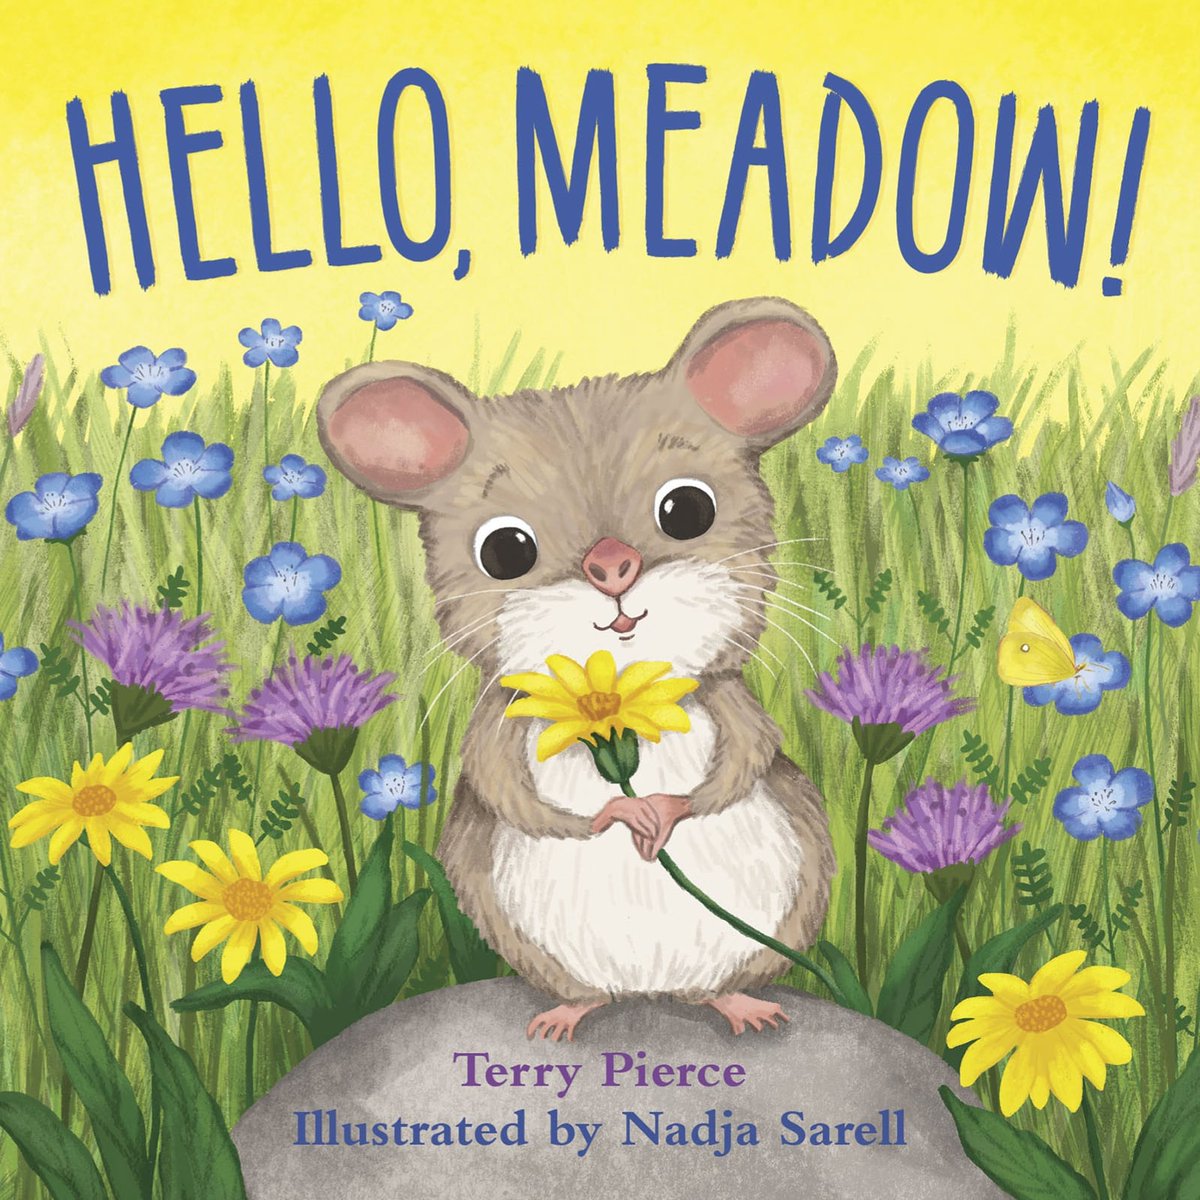 Reminder: 2 more days to enter my #bookgiveaway of HELLO, MEADOW! in celebration of its release! Do each of these things to have your name entered: 🐭Follow me 🦋Retweet 🌻Comment or tag a friend Ends midnight 04.20.23. US only. #boardbook #librarians #educators #kidlit